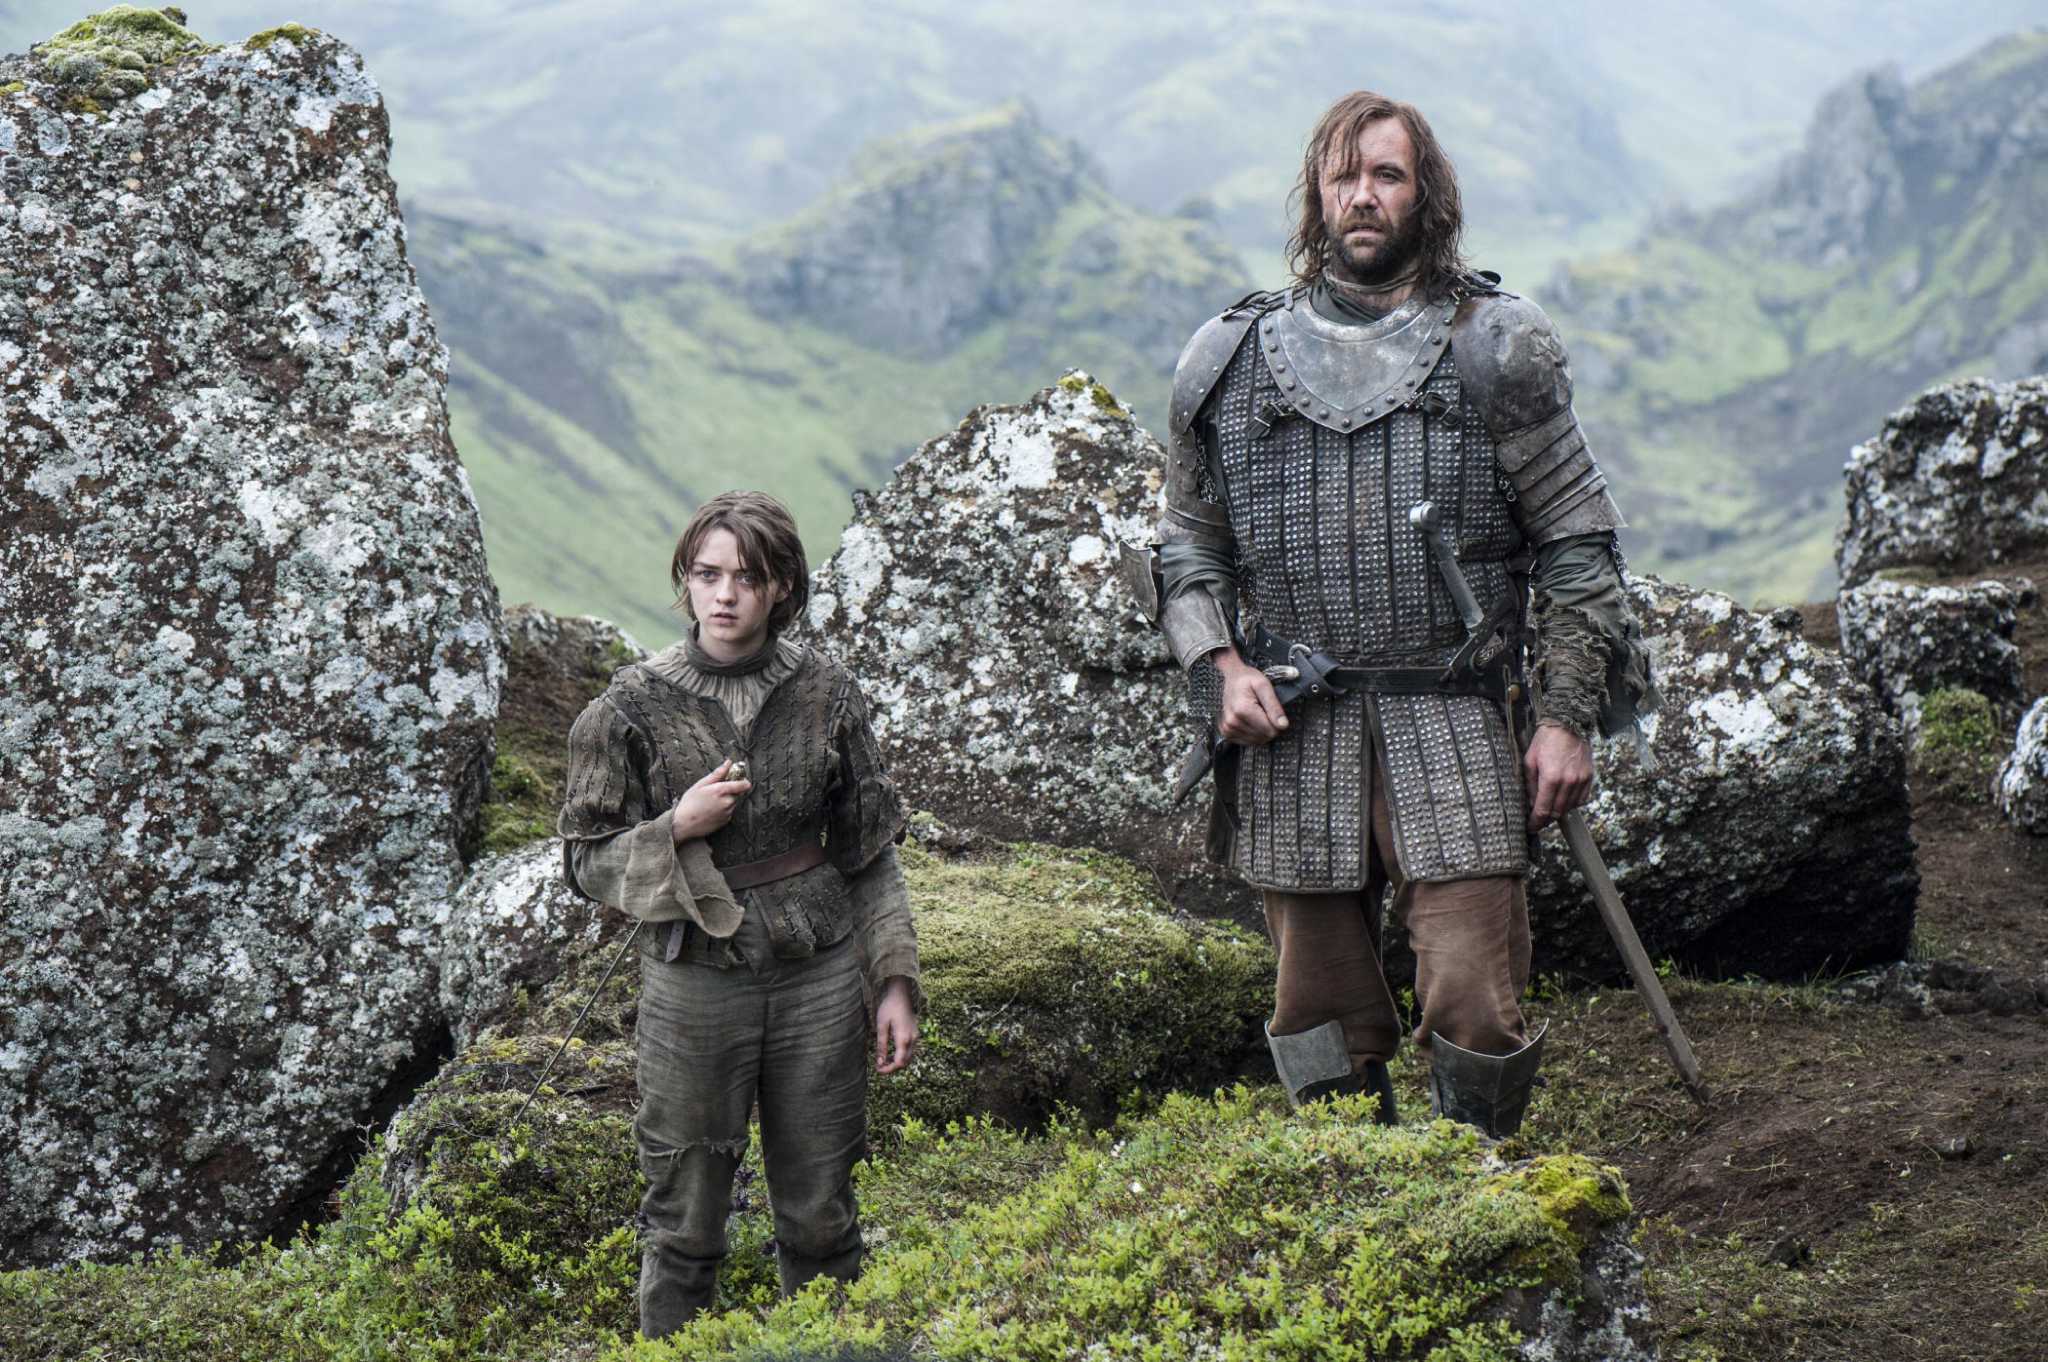 'Game of Thrones' takes a trailer of its new season to Imax